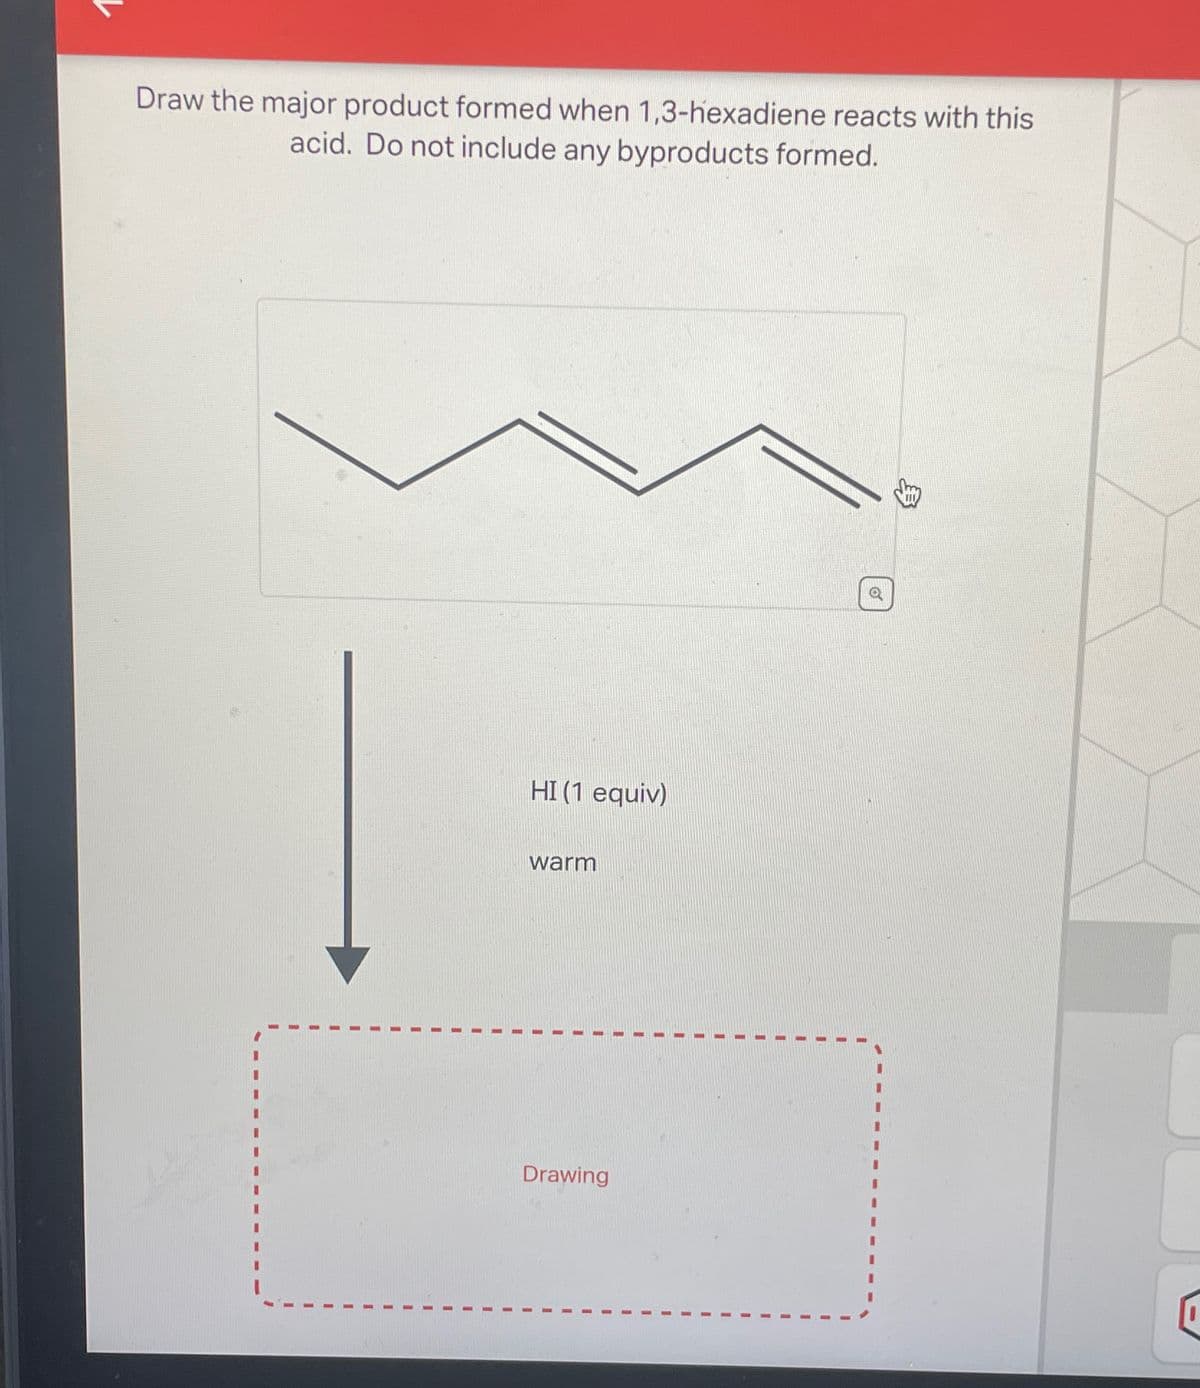 Draw the major product formed when 1,3-hexadiene reacts with this
acid. Do not include any byproducts formed.
I
I
I
HI (1 equiv)
warm
Drawing
I
o